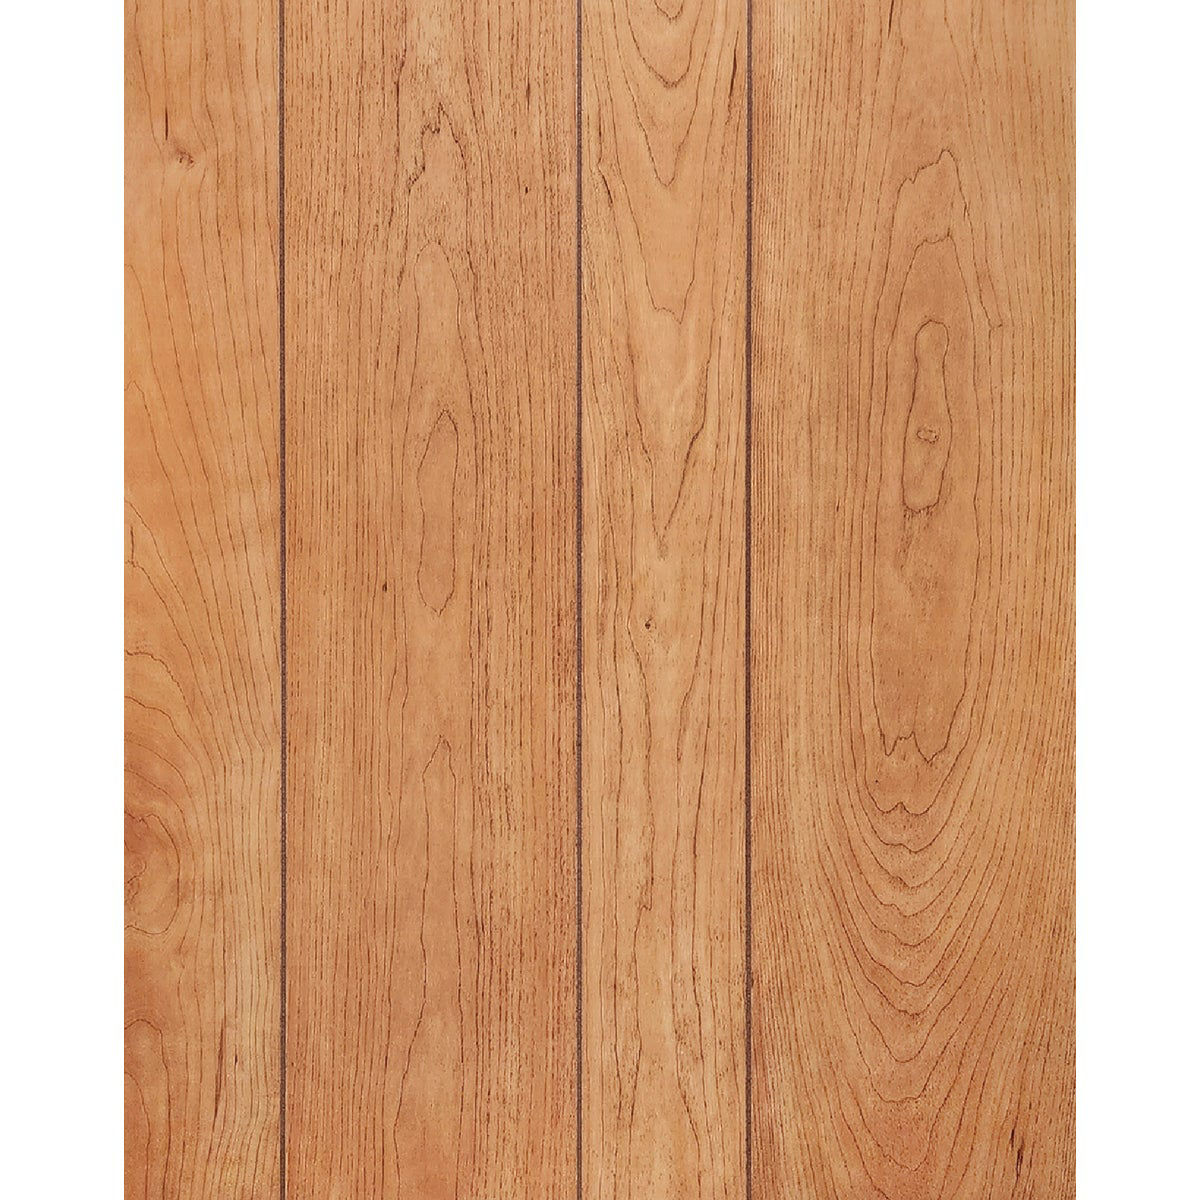 Flexible Wood panel - Cherry wood panel for pole covers